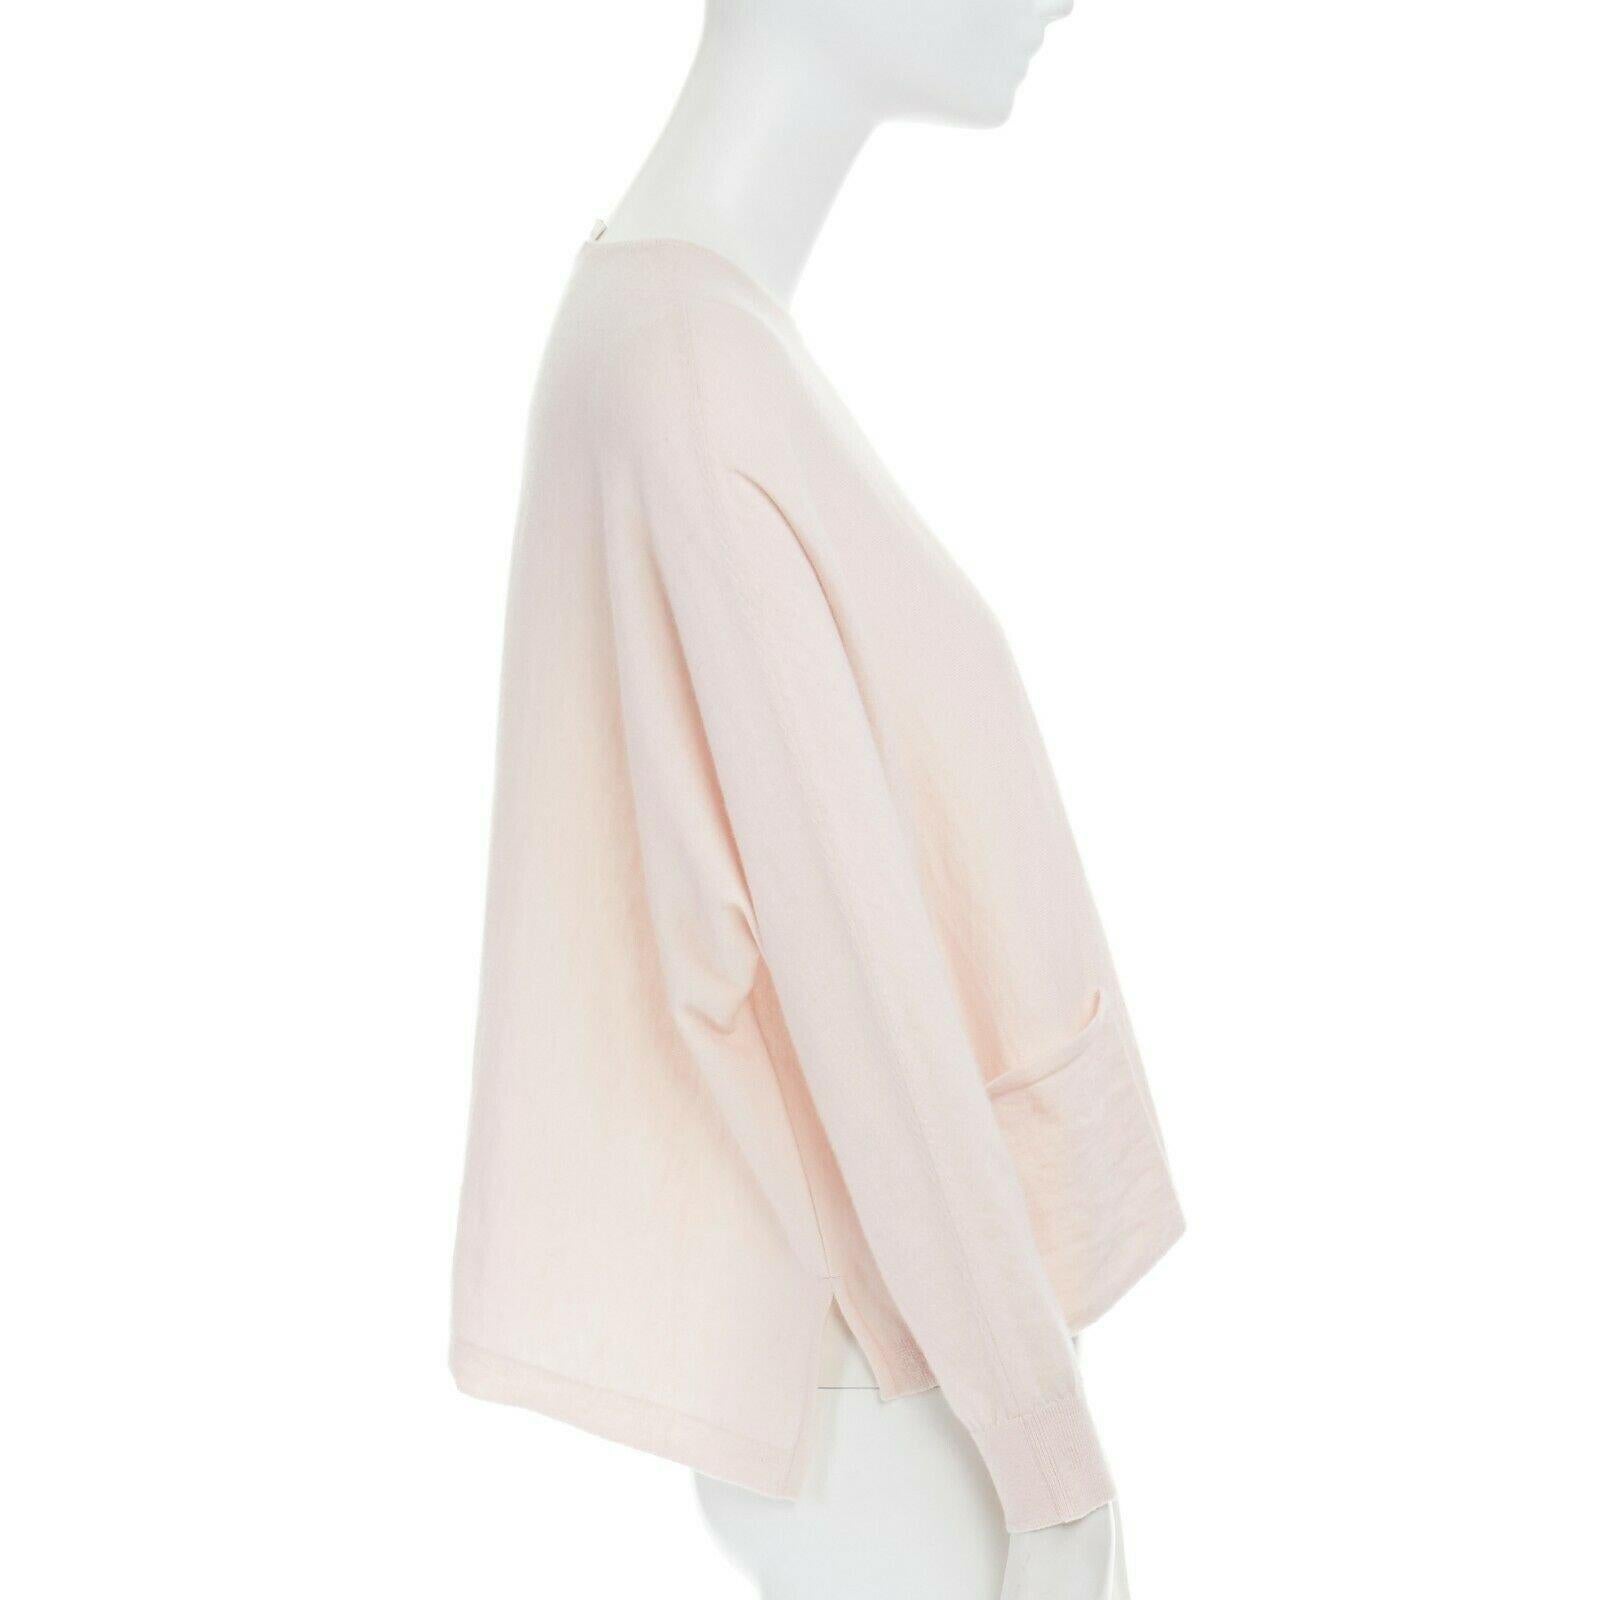 ANTEPRIMA 100% cashmere light pink dual pocket long sleeve boxy sweater top IT38 Reference: LNKO/A01018 
Brand: Anteprima 
Material: Cashmere 
Color: Pink 
Pattern: Solid 
Extra Detail: 100% cashmere. Light pink. Round neck. Long sleeves. Boxy fit.